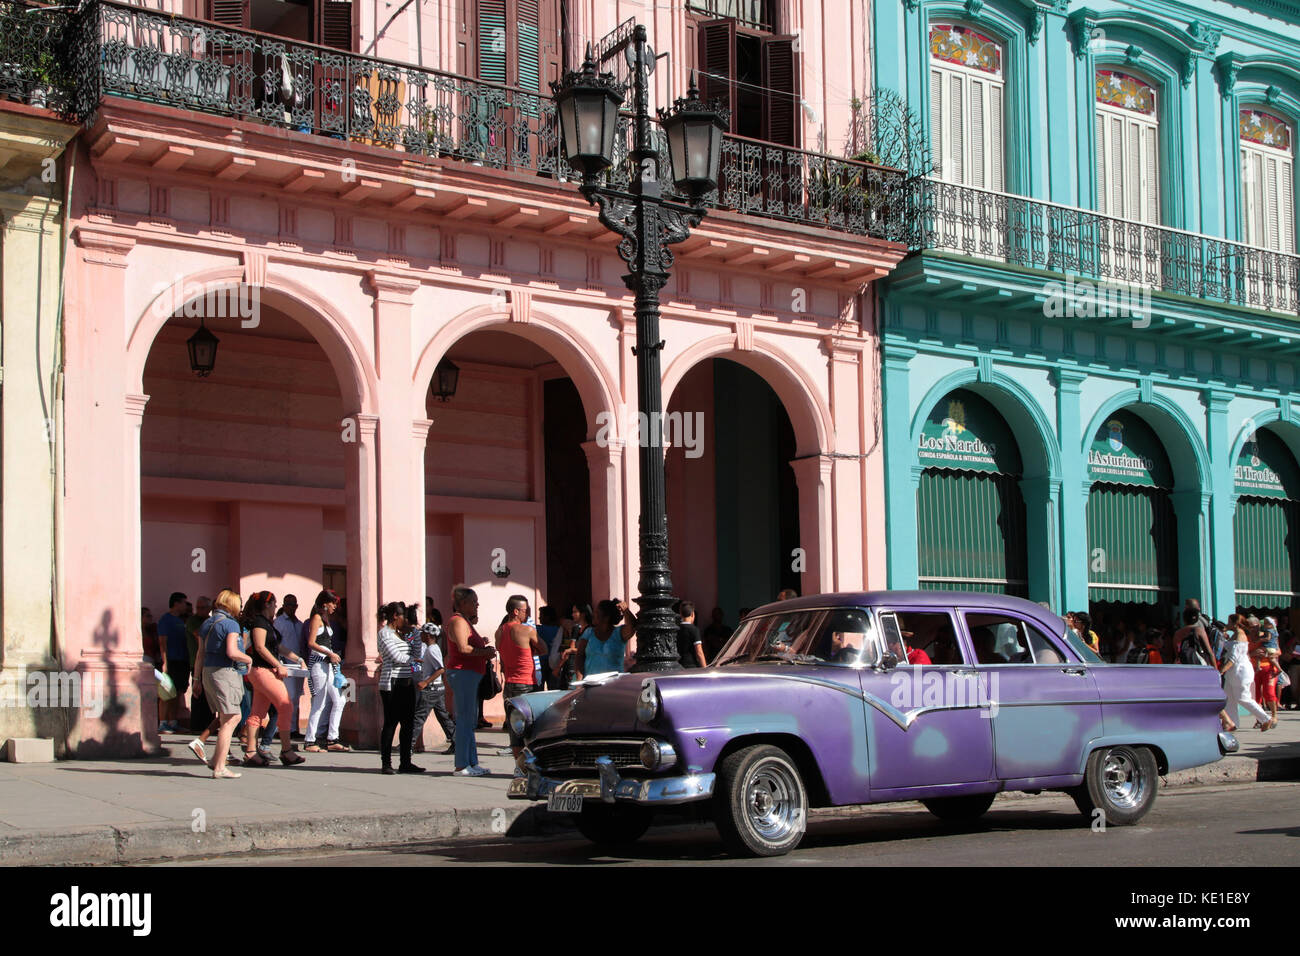 HAVANA, CUBA, FEBRUARY 15, 2014 : Classic old American car in the streets of Havana. Classic cars are still in use in Cuba and old timers have become  Stock Photo